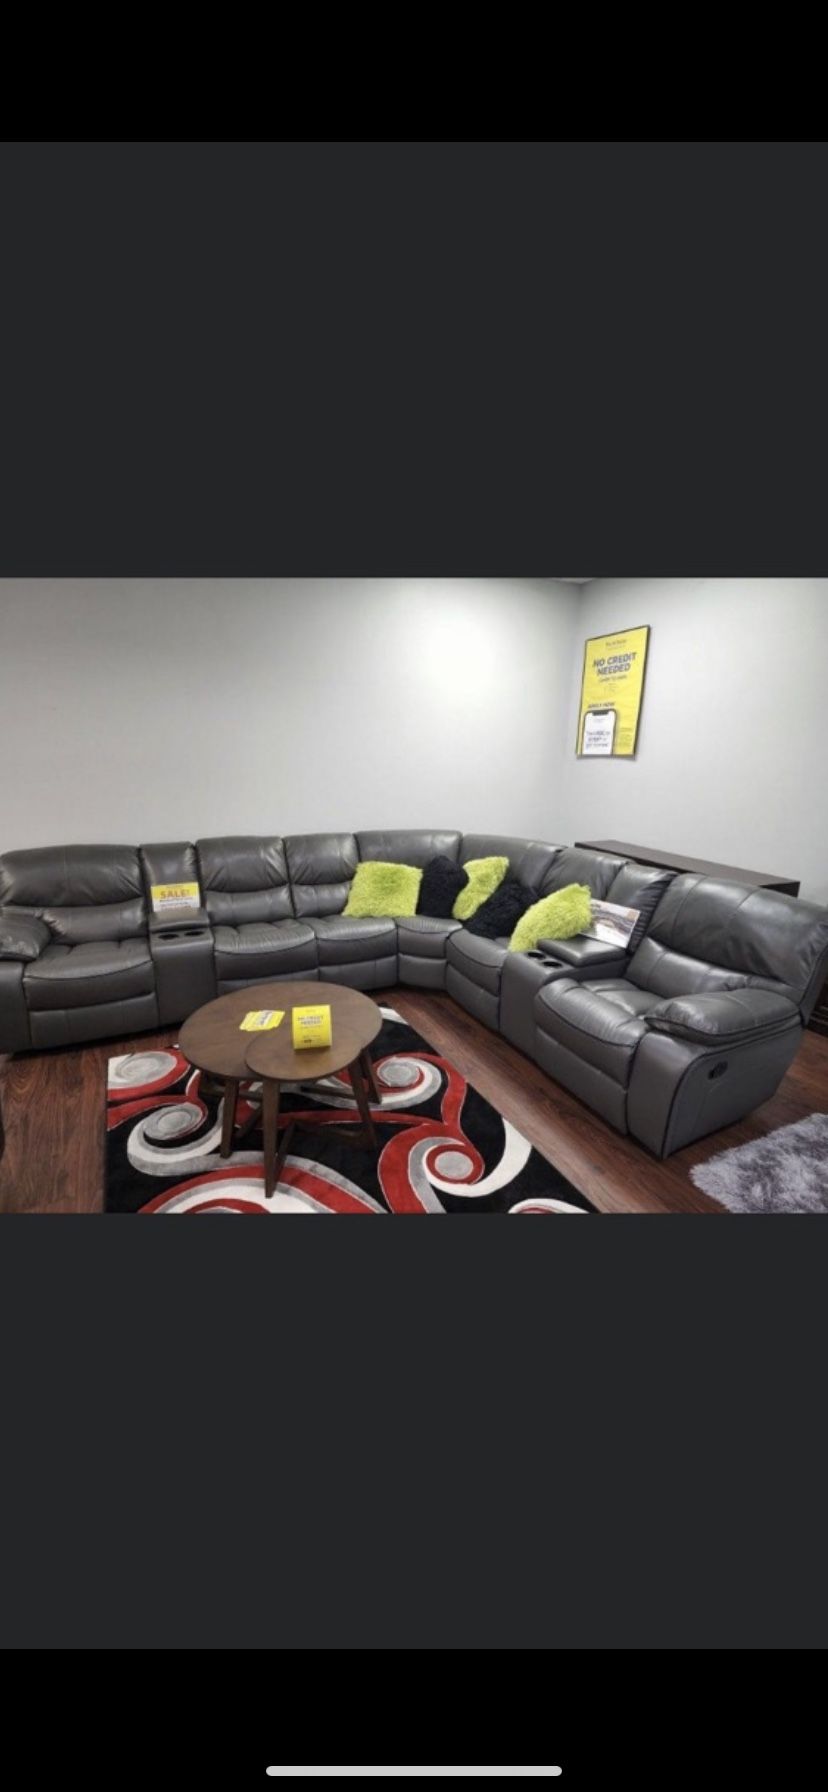 COMFORTABLE RECLINING FURNITURE! DELIVERY TODAY! SECTIONALS $1299! SOFA LOVESEATS $999! DELIVERY TODAY! 